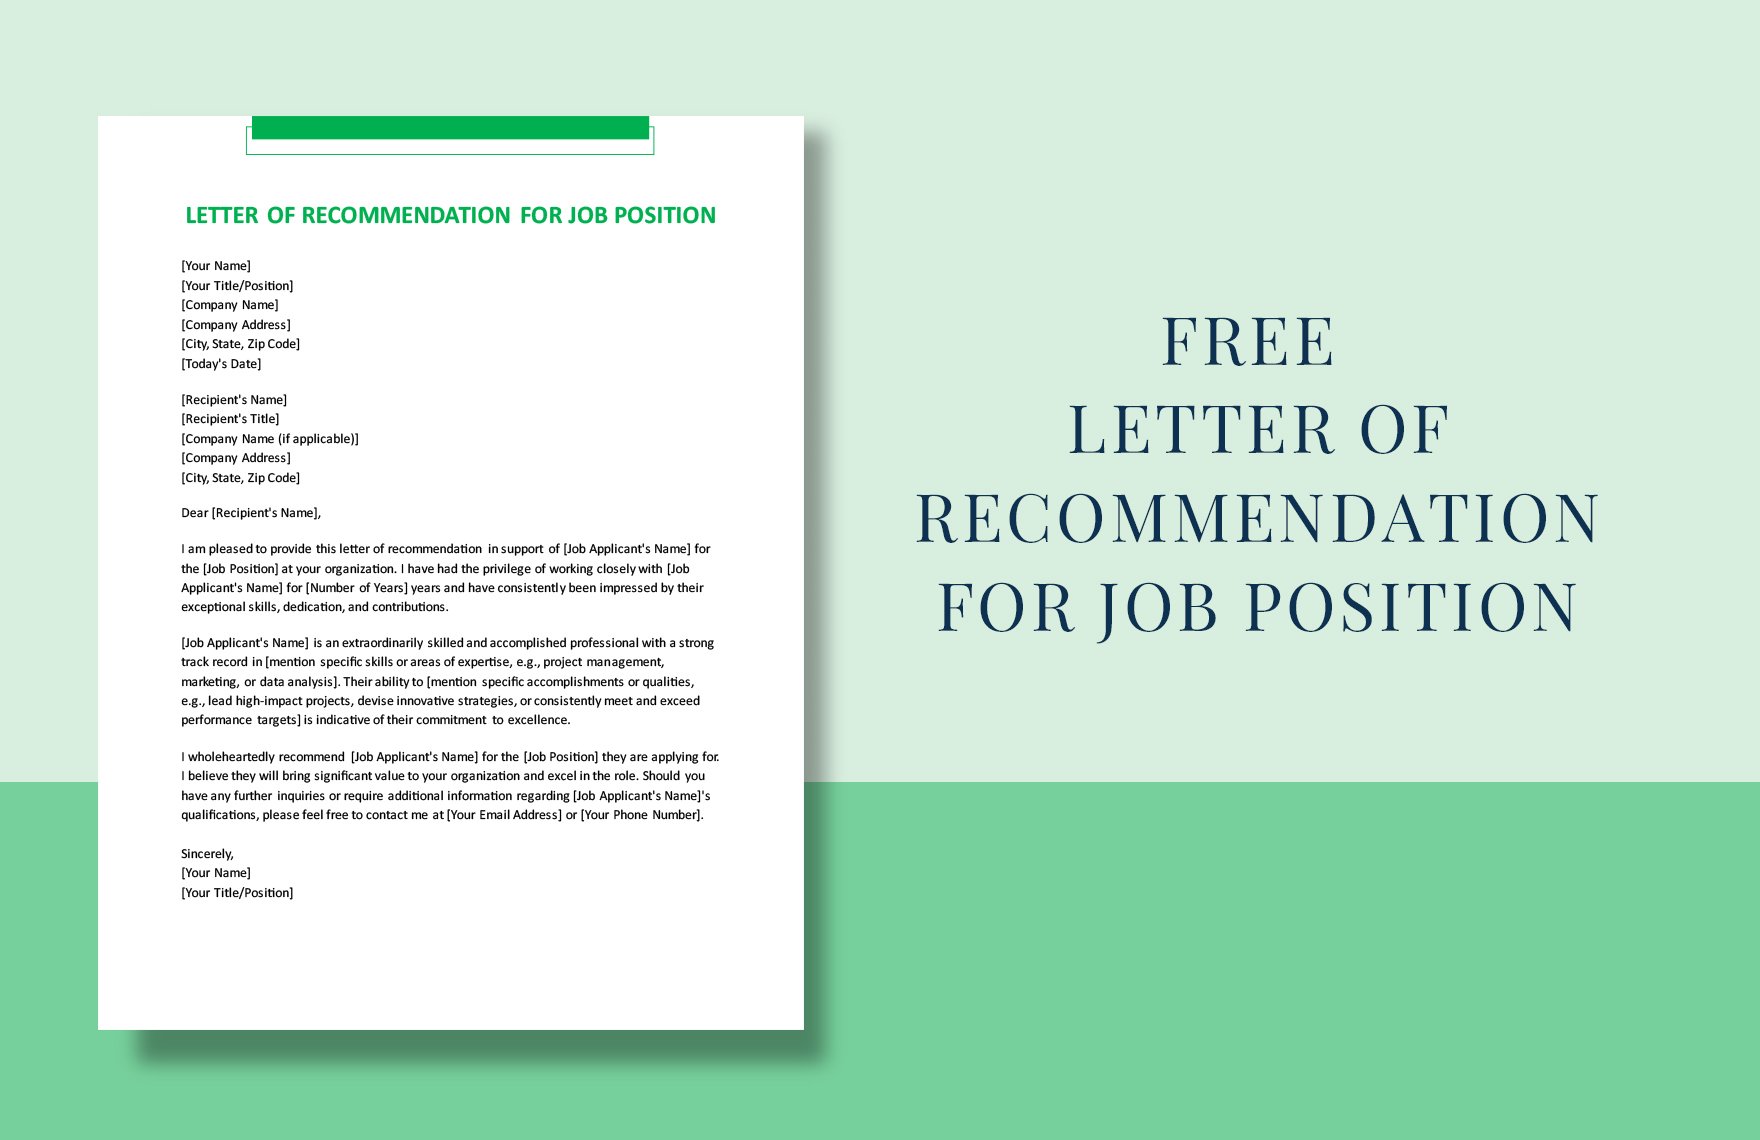 Letter Of Recommendation For Job Position